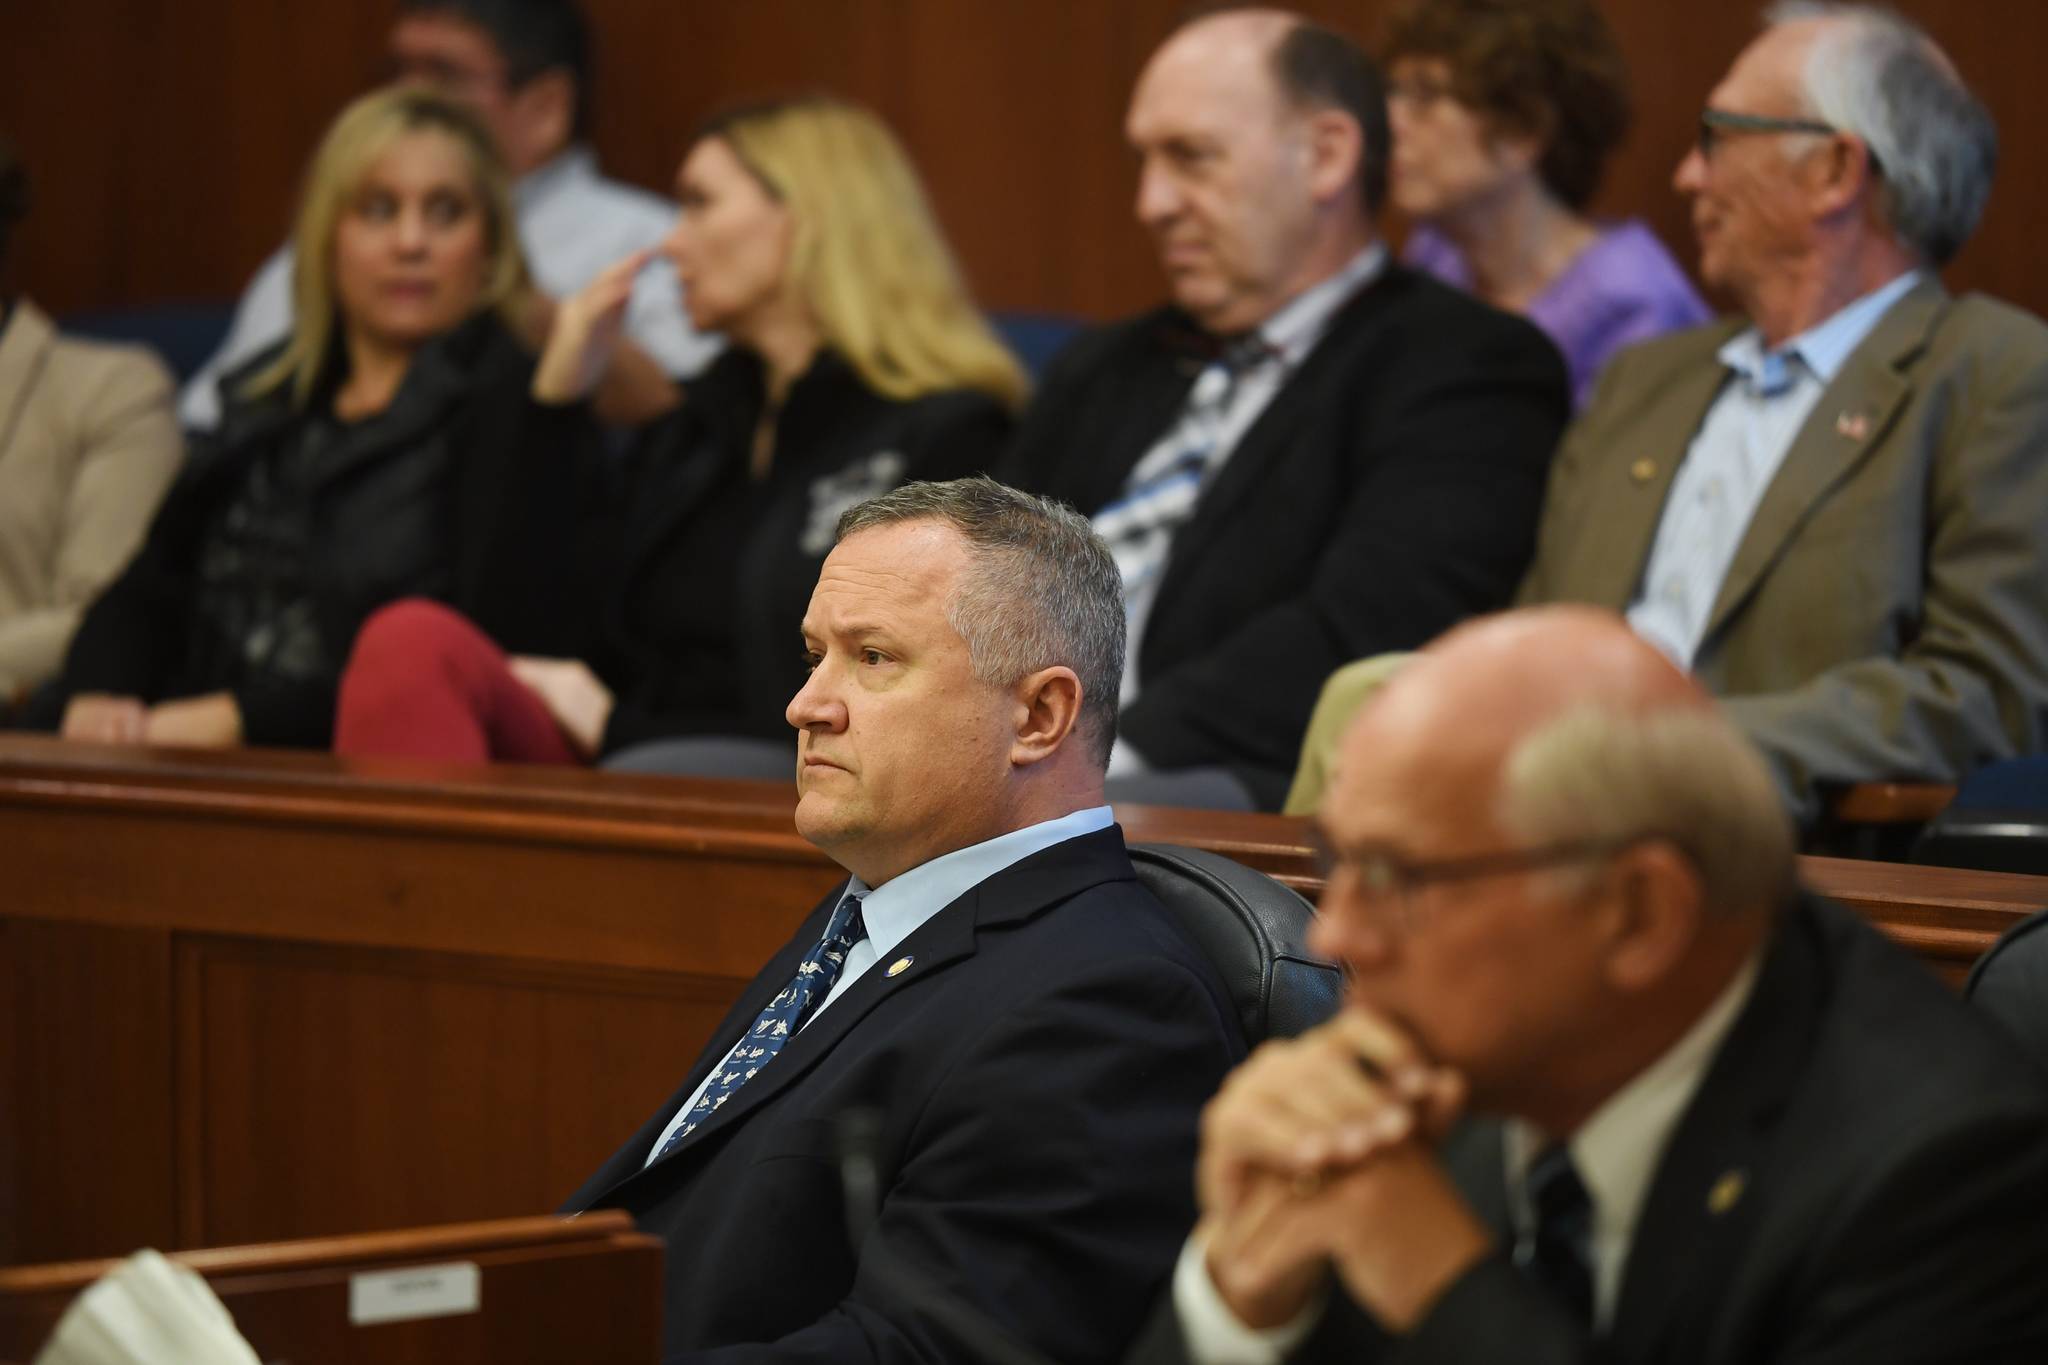 Sen. Mike Shower, R-Wasilla, watches the vote on the Permanent Fund Dividend on reconsideration on Monday, June 10, 2019. The vote failed 10-10. (Michael Penn | Juneau Empire)